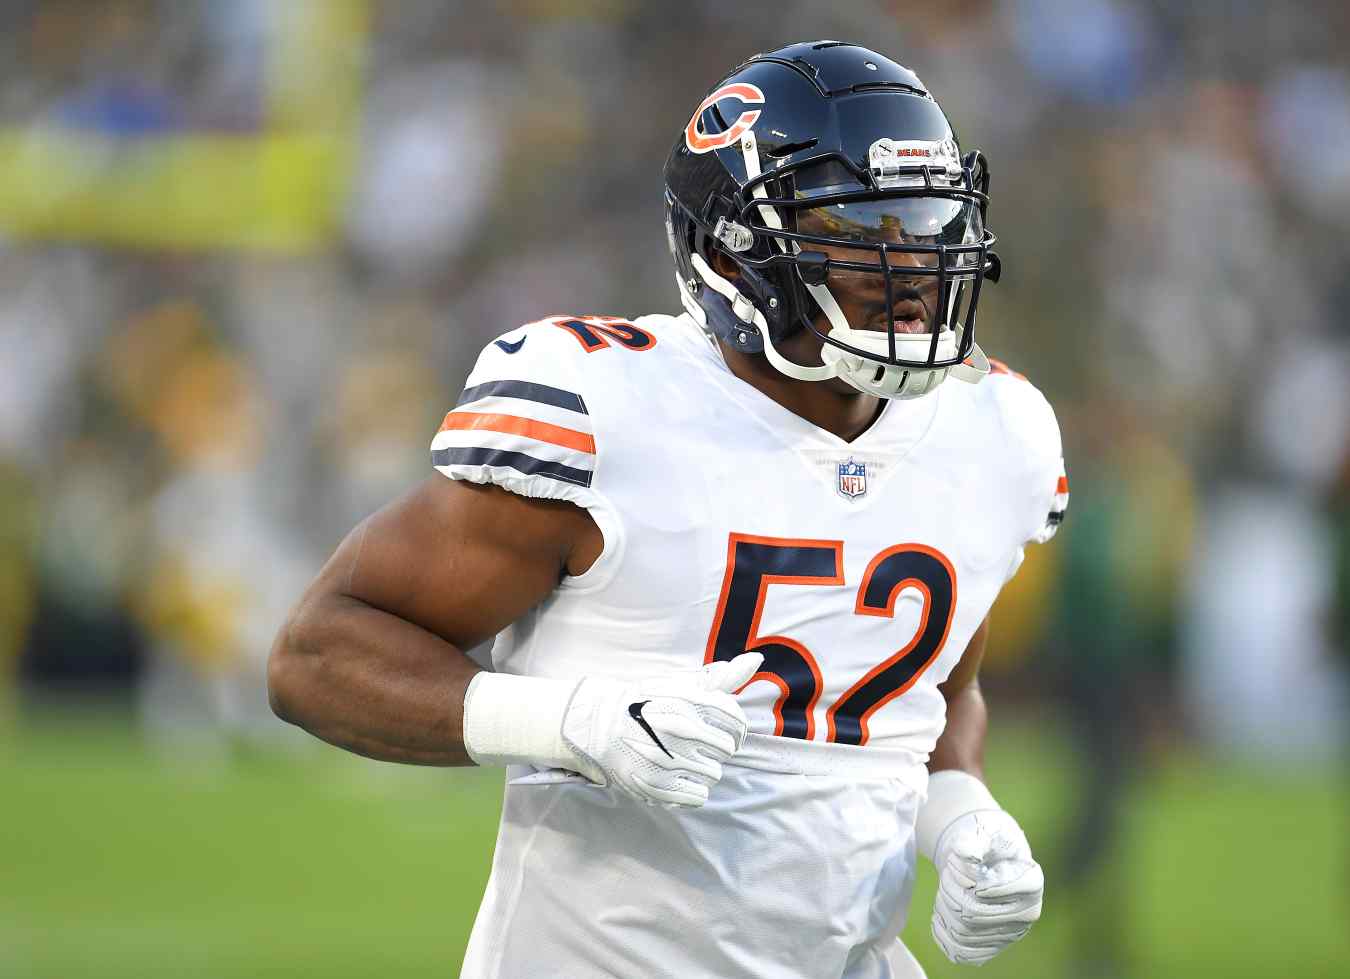 khalil-mack-trade-details-how-bears-are-winning-deal-with-raiders